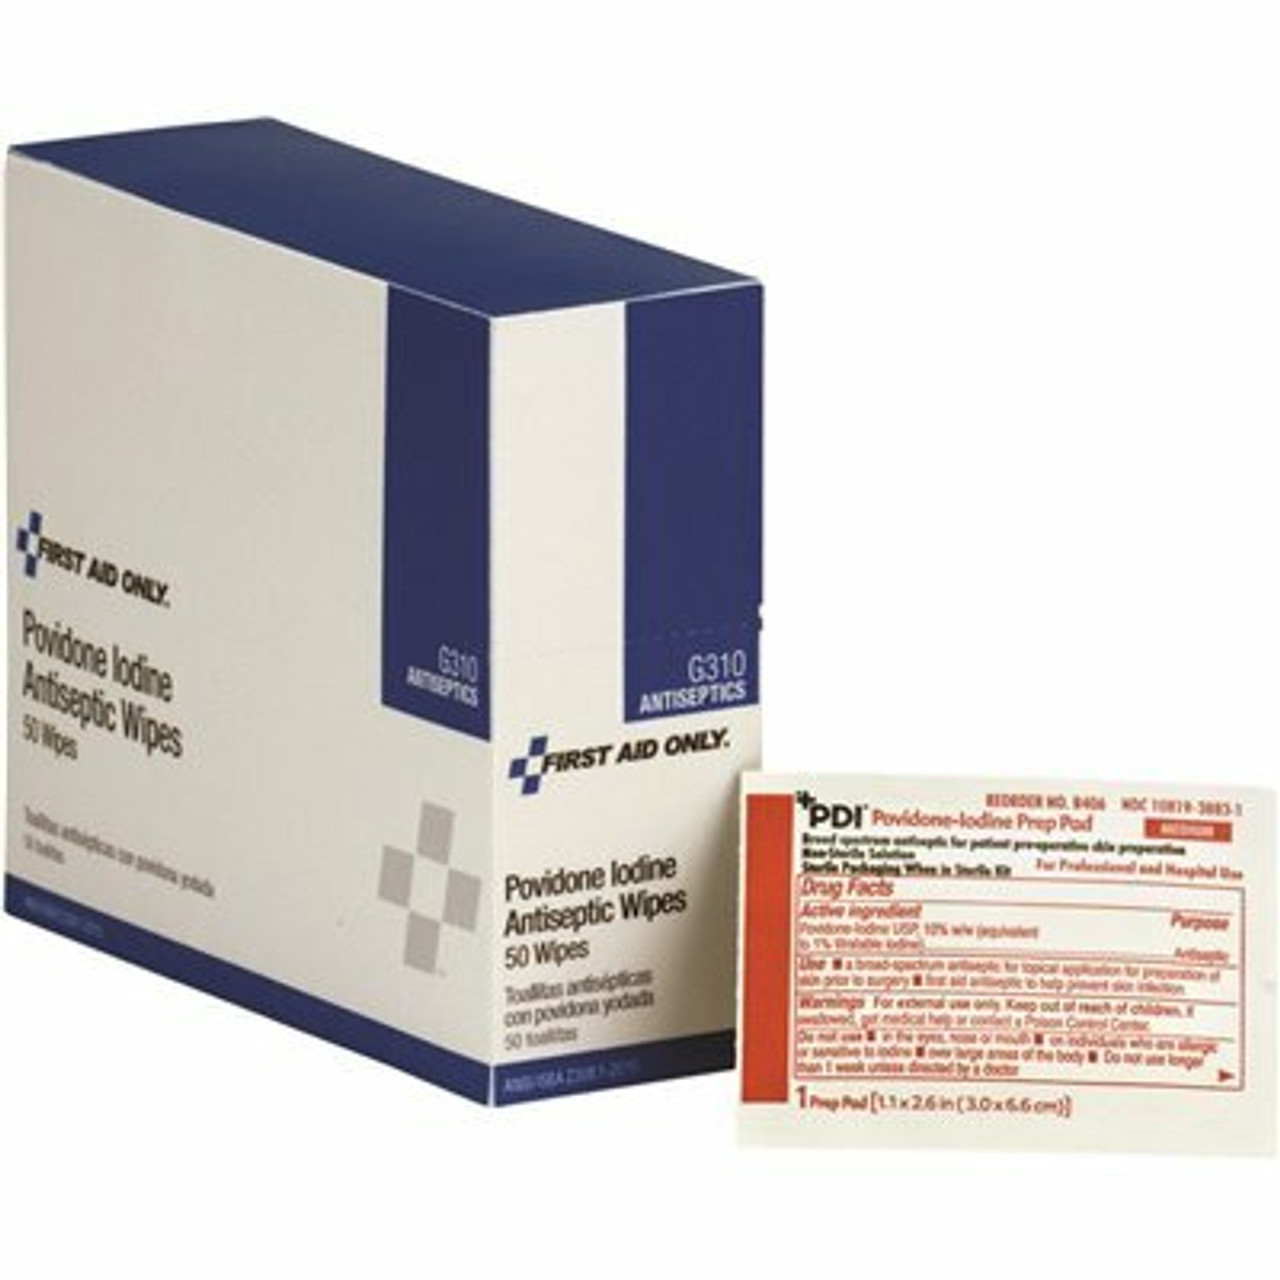 First Aid Only Povidone-Iodine Infection Control Wipes (50 Per Box)